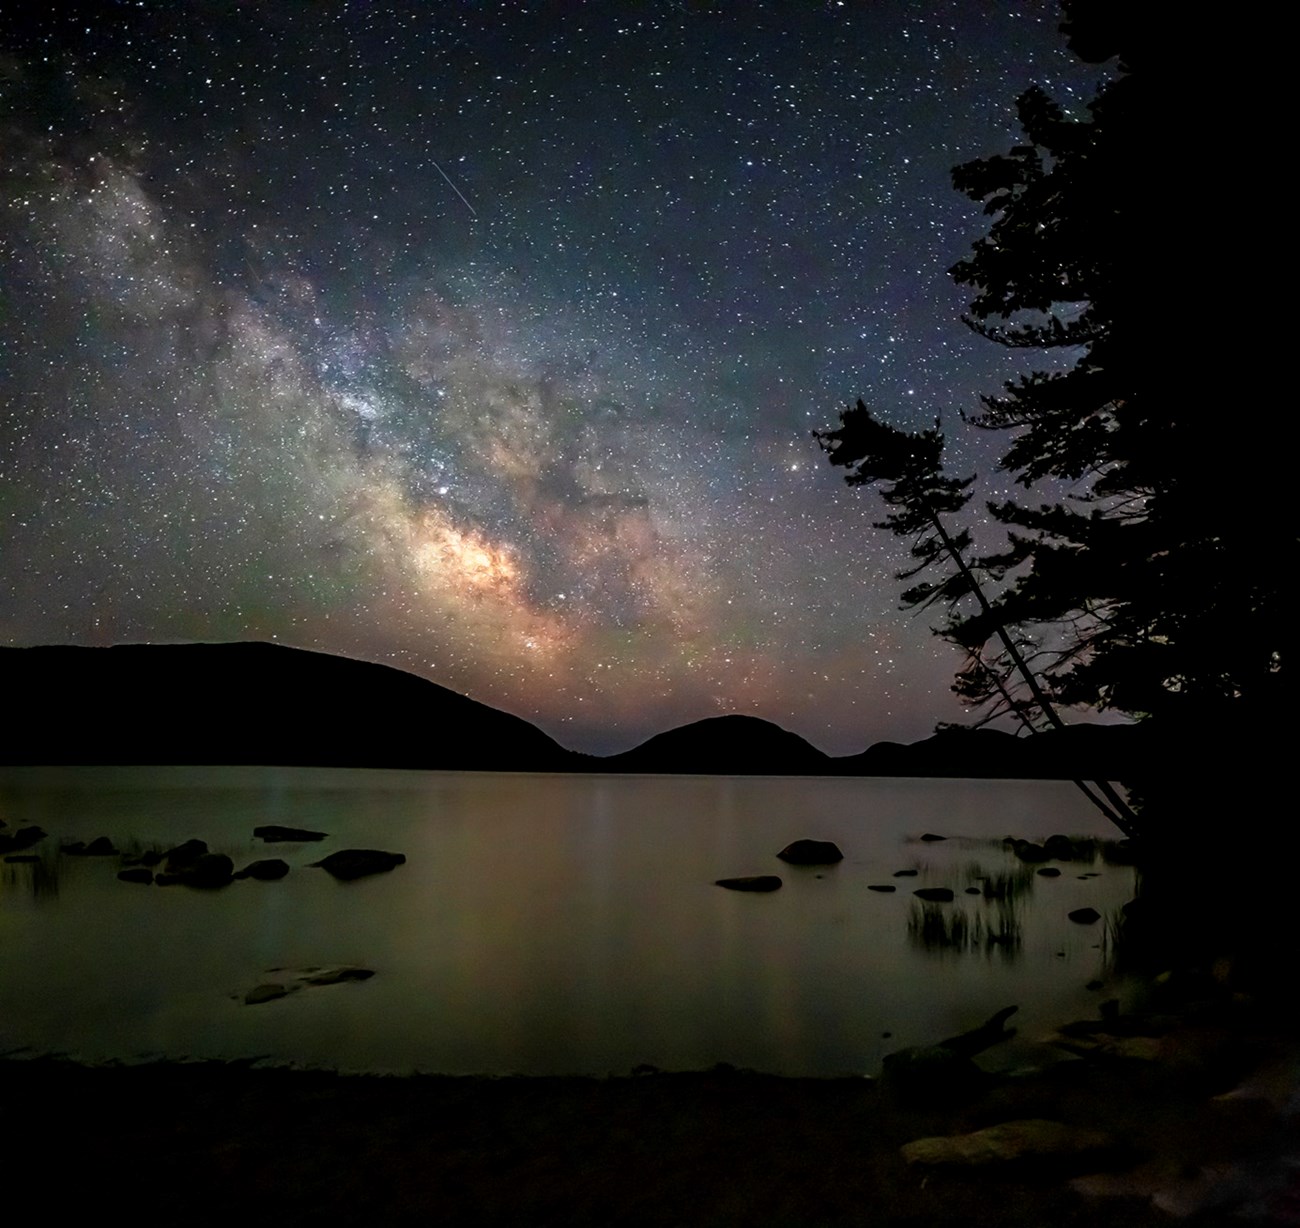 Night sky image with Milky Way in distance, a silhouette of mountains and lake reflections in middle distance, and silhouette of a leaning tree in foreground